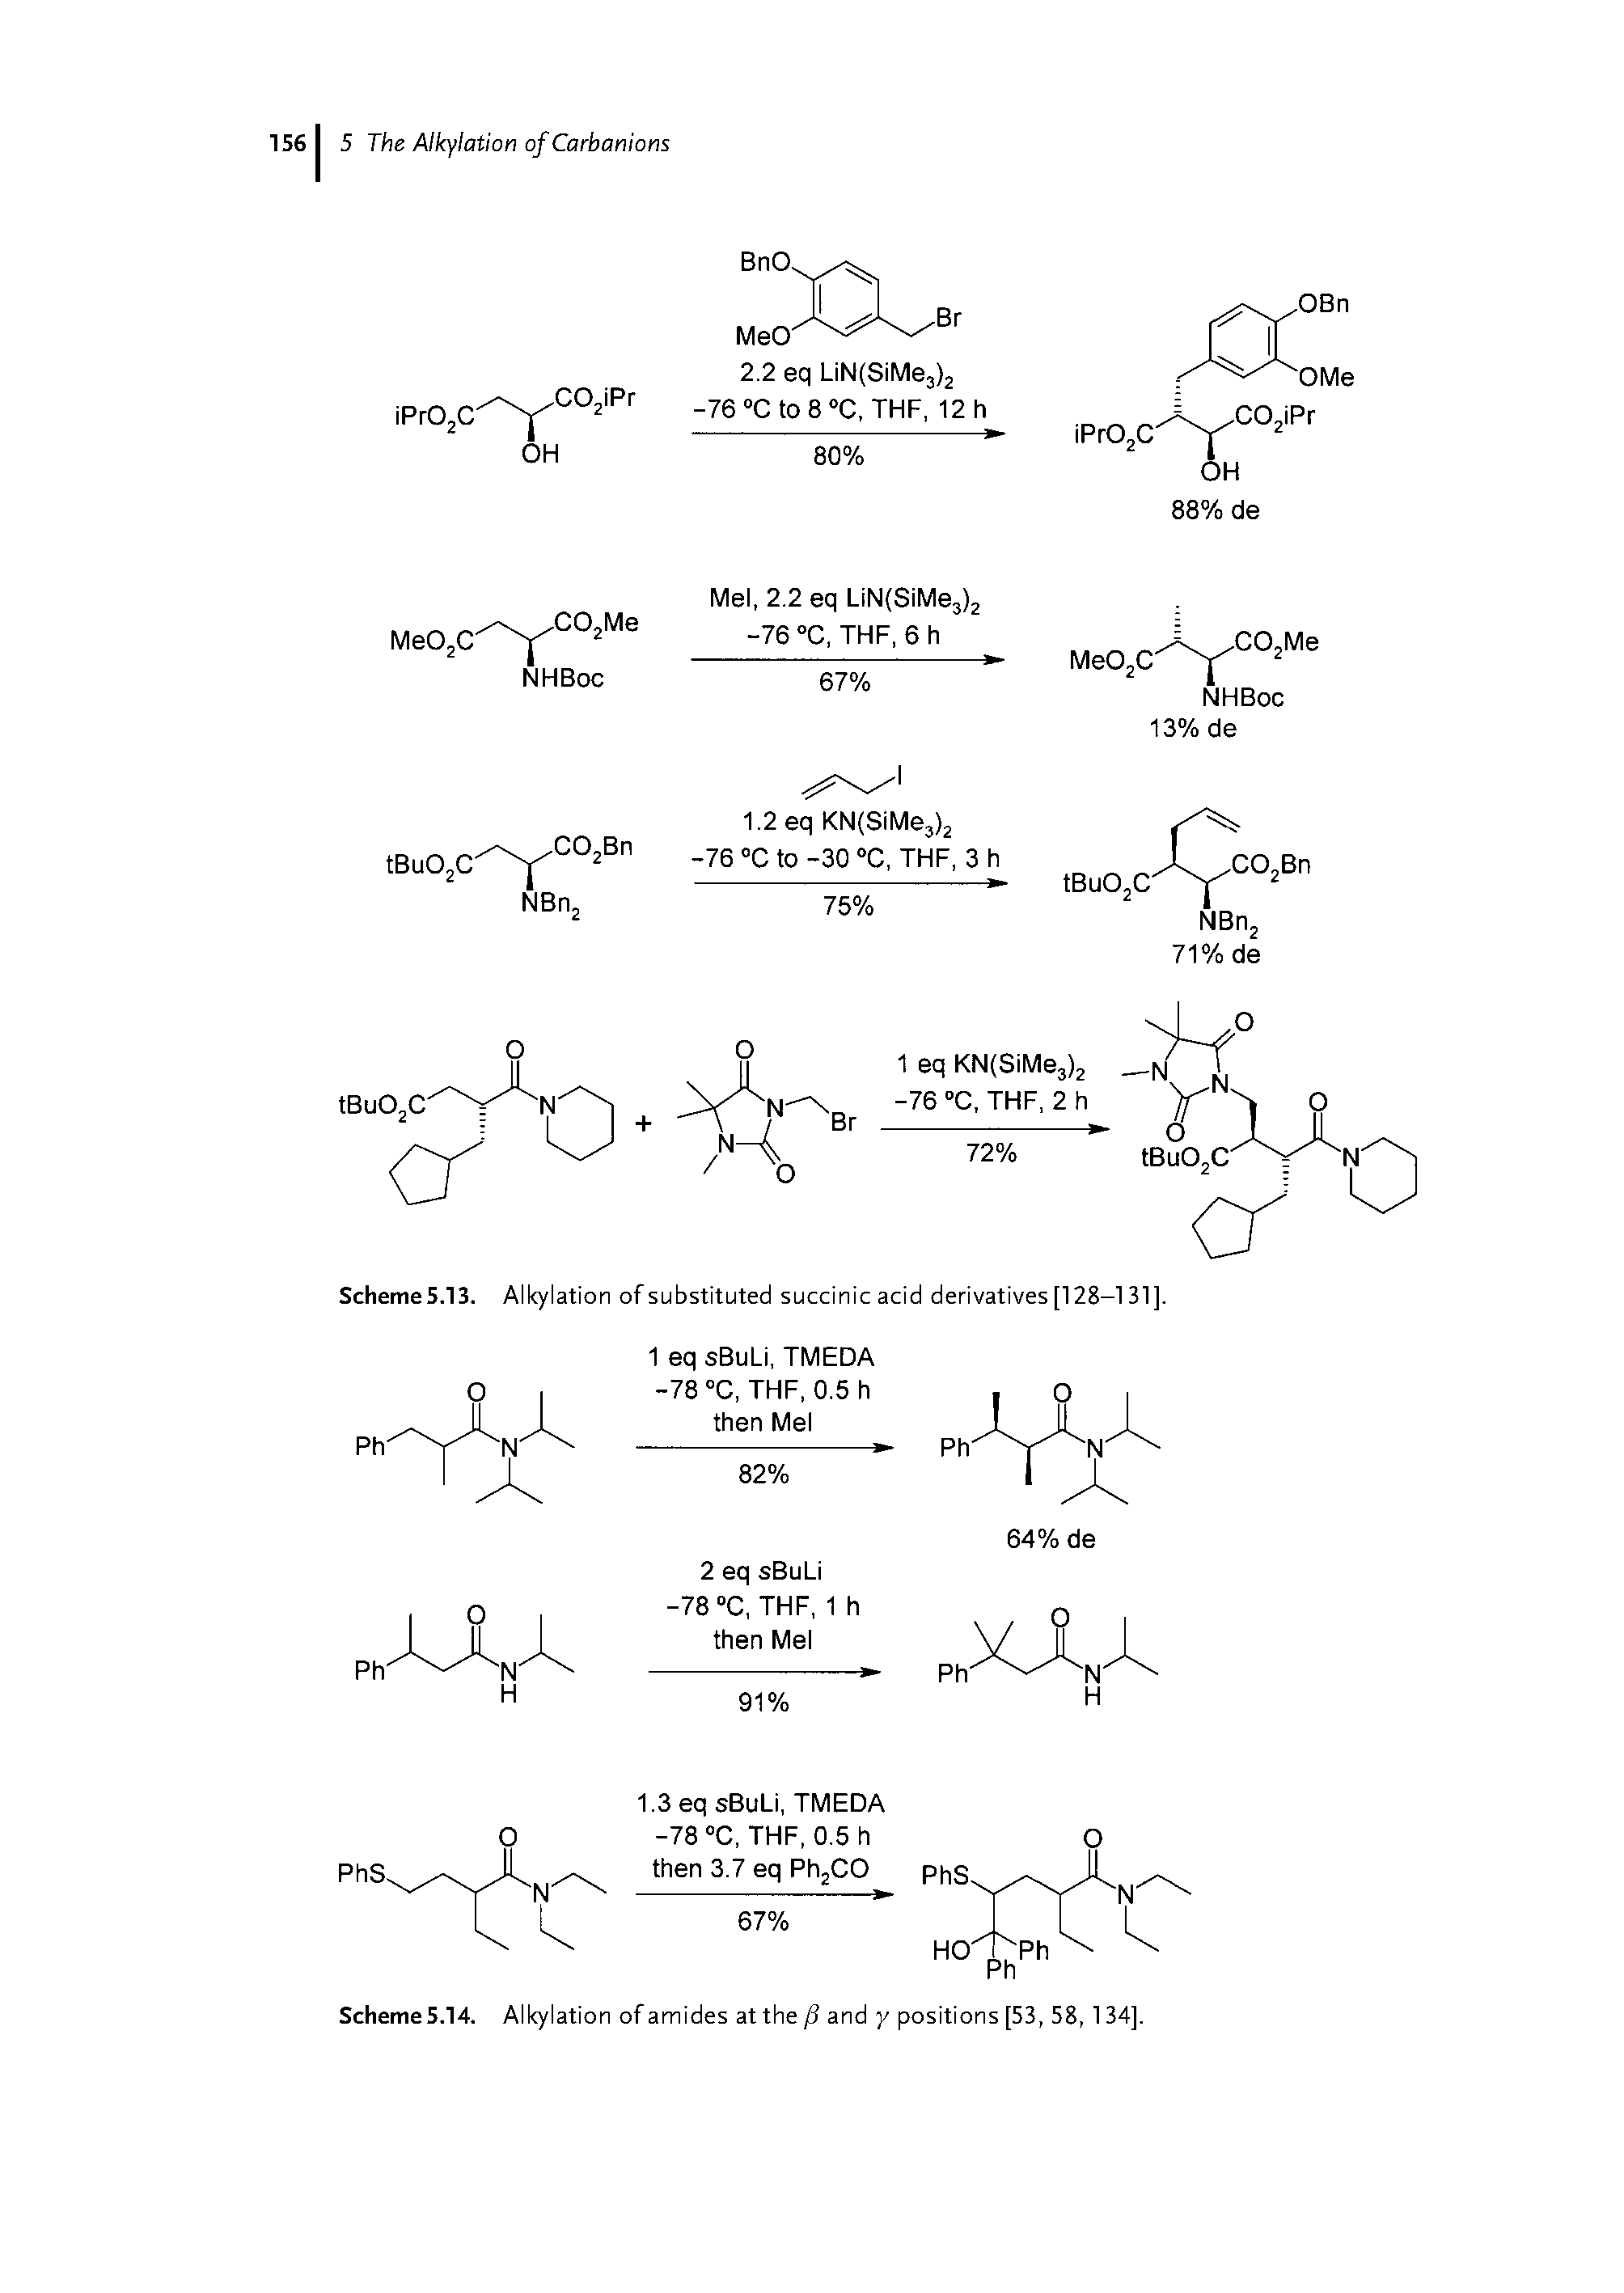 Schemes.13. Alkylation of substituted succinic acid derivatives [128-131].